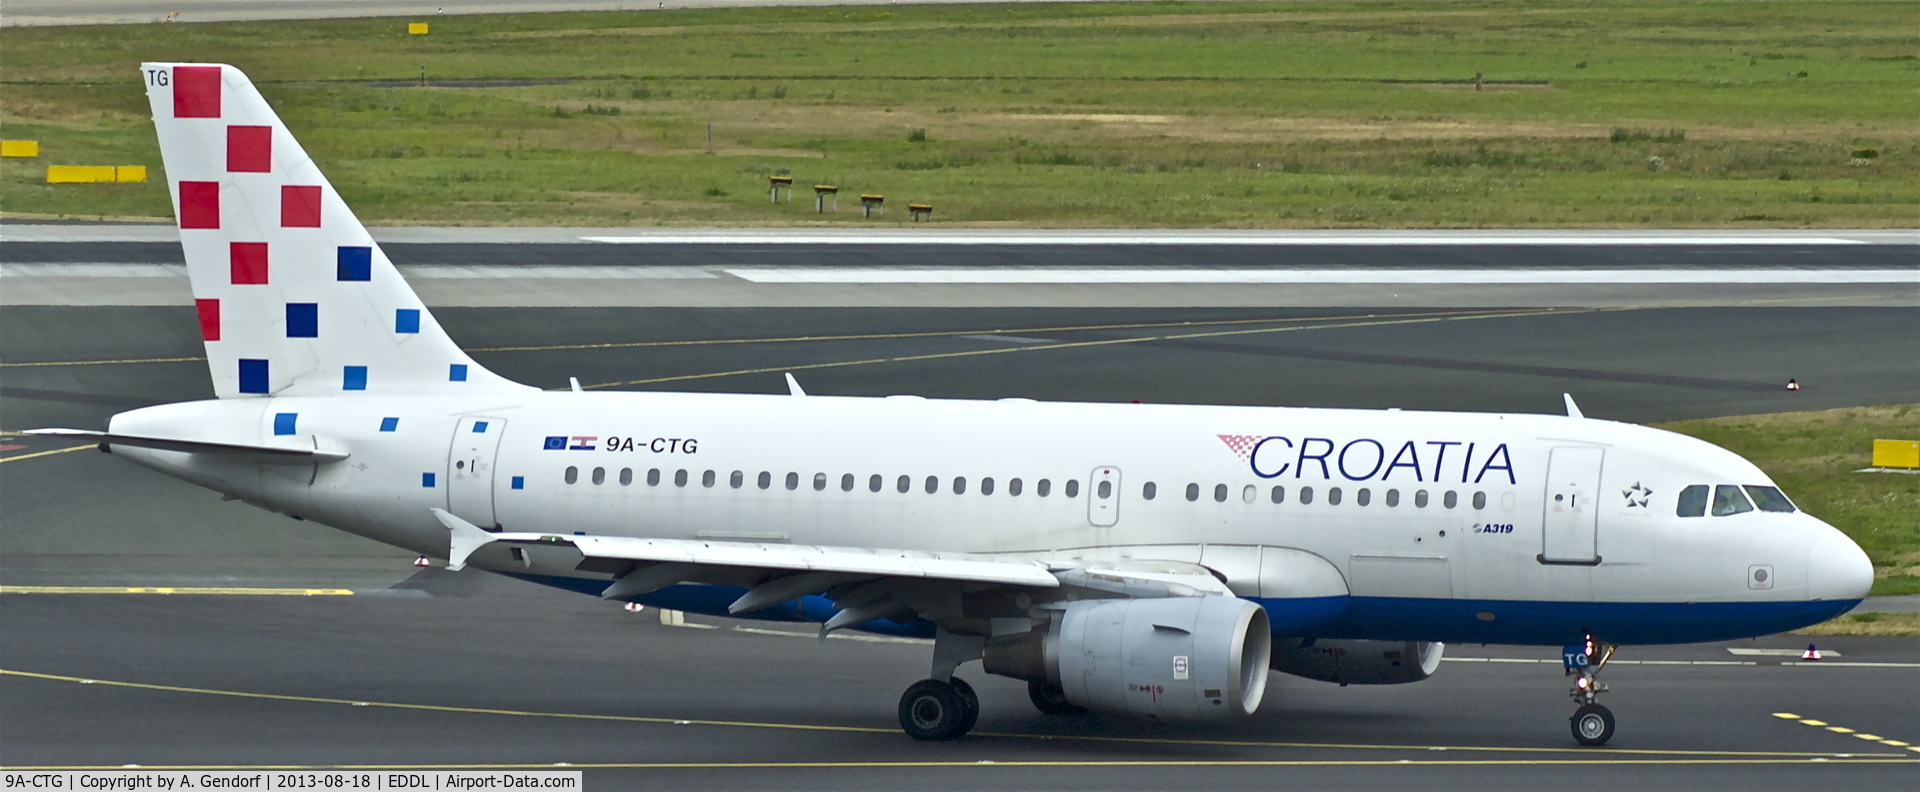 9A-CTG, 1998 Airbus A319-112 C/N 767, Croatia, seen here on taxiway 